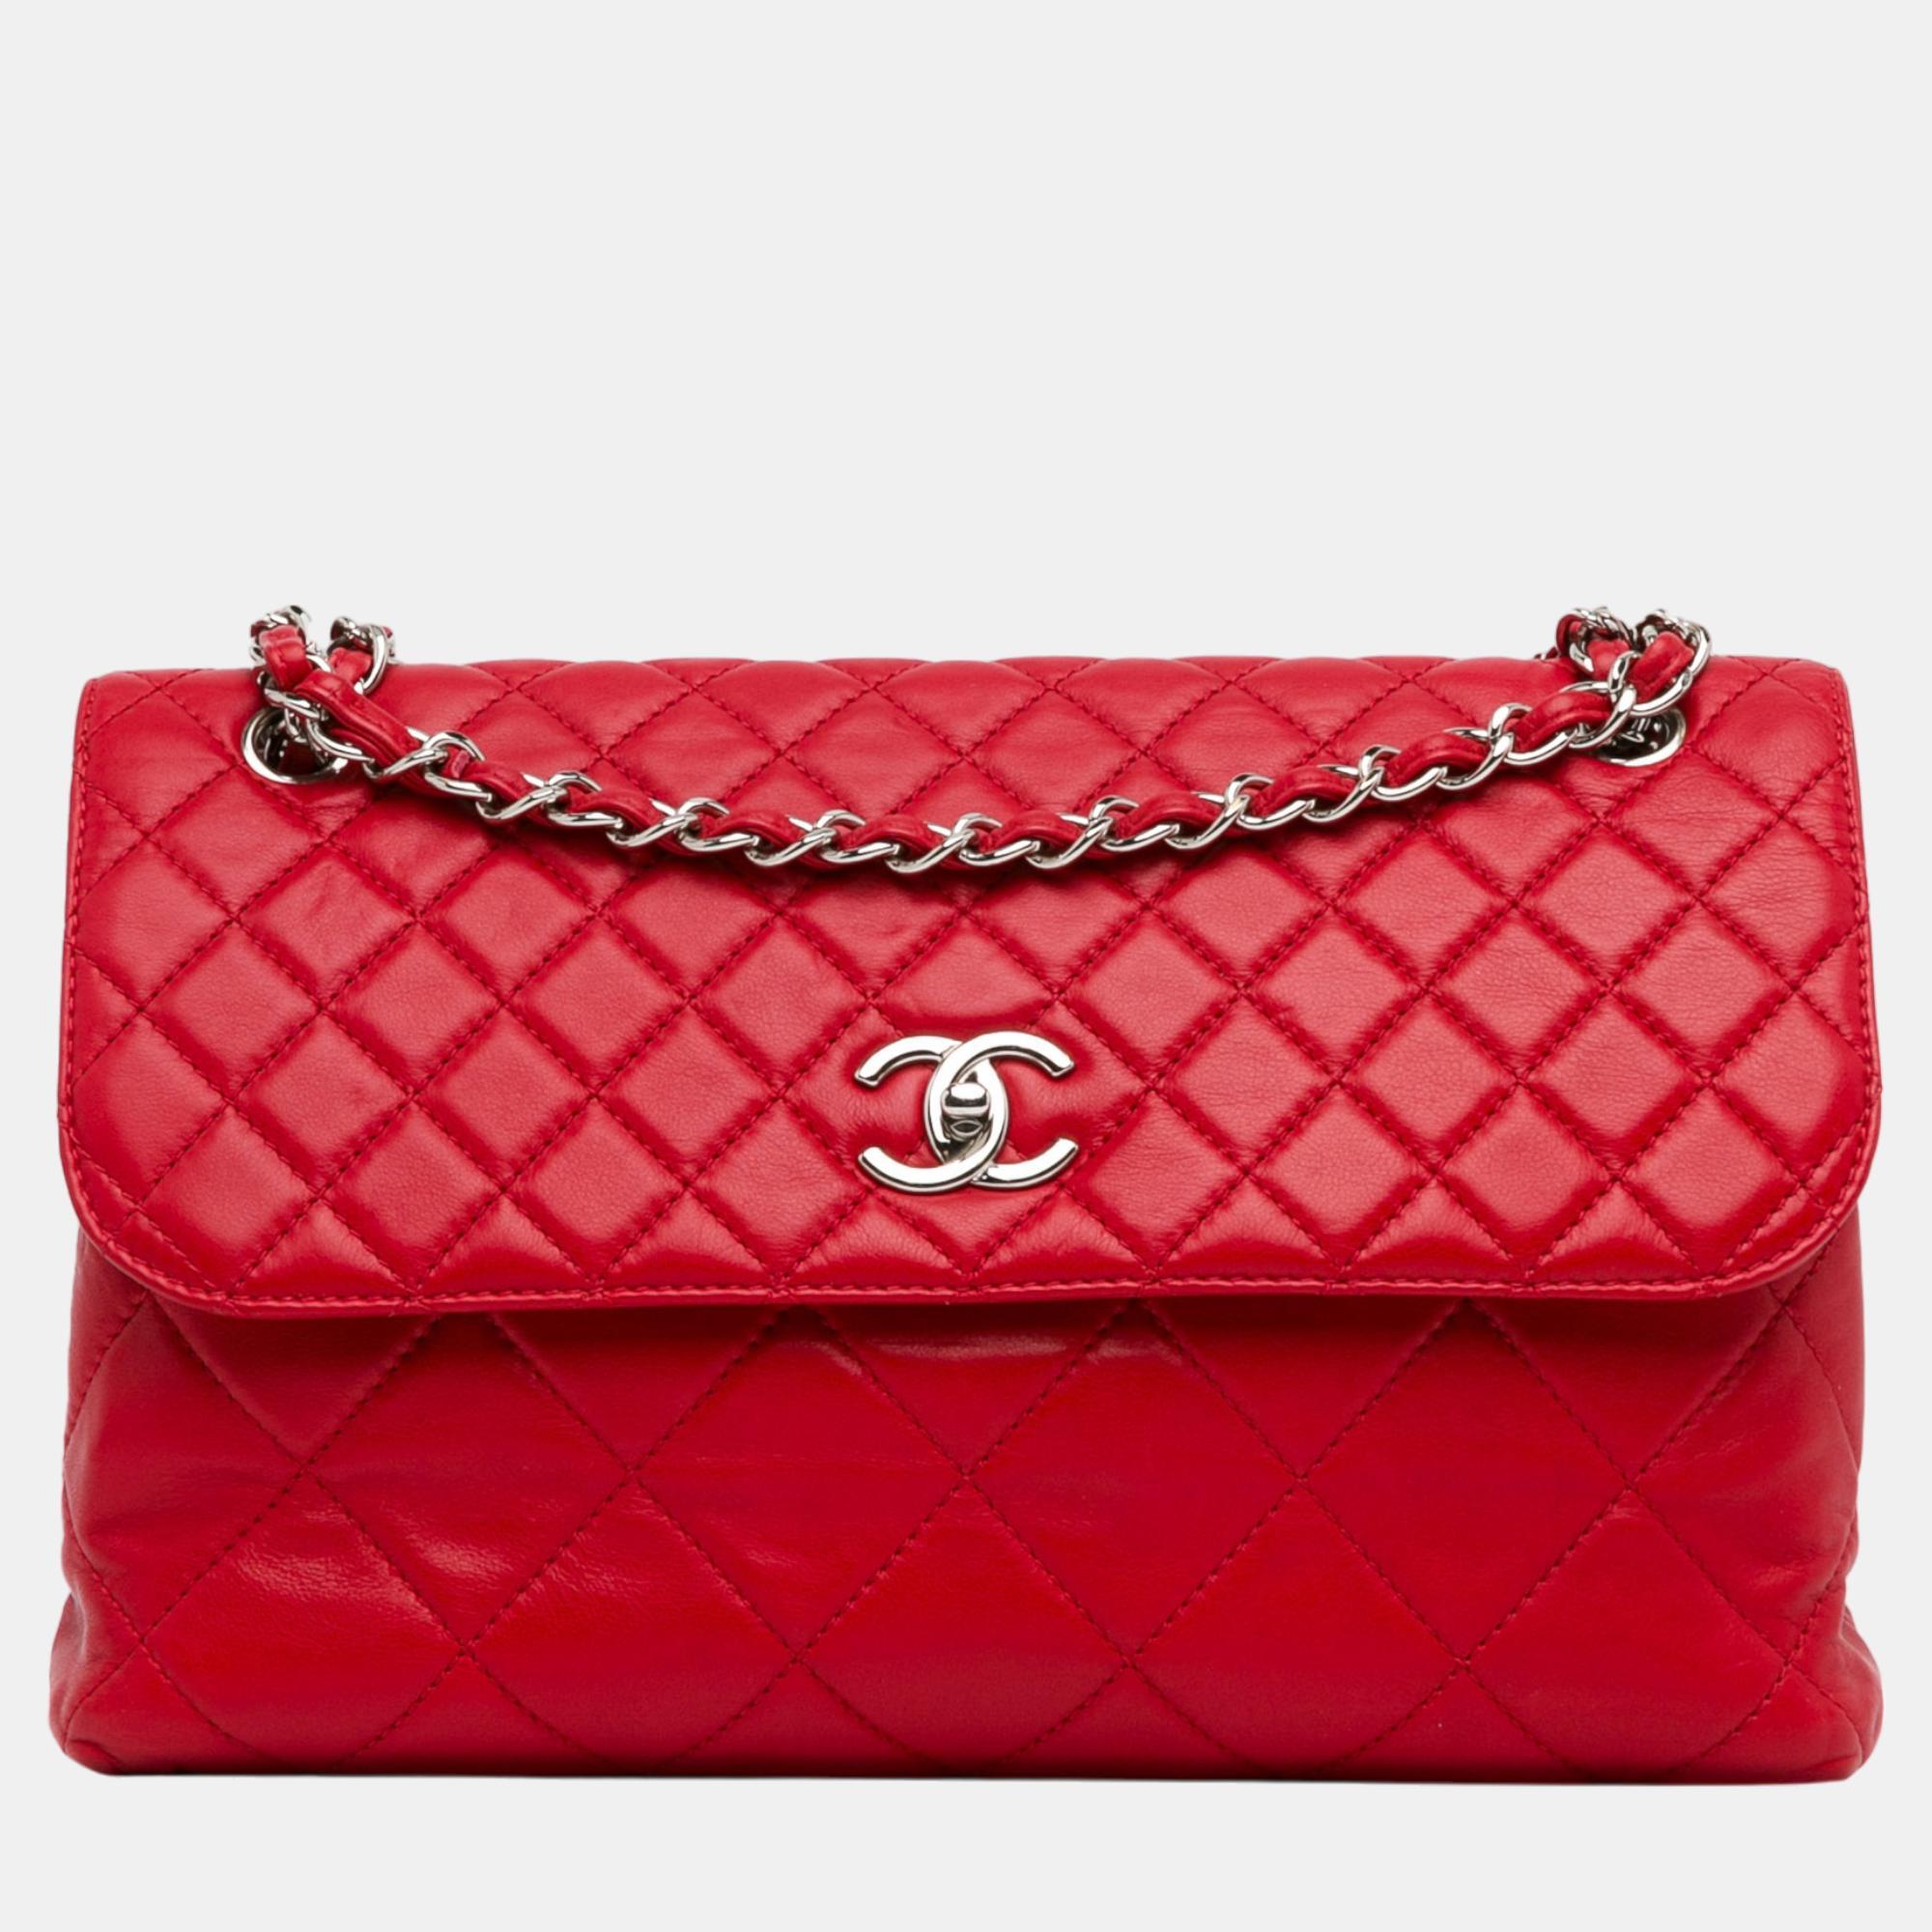 This flap bag features a quilted leather body leather woven chain straps a front flap with a twist lock closure an exterior back slip pocket and interior zip and slip pockets.